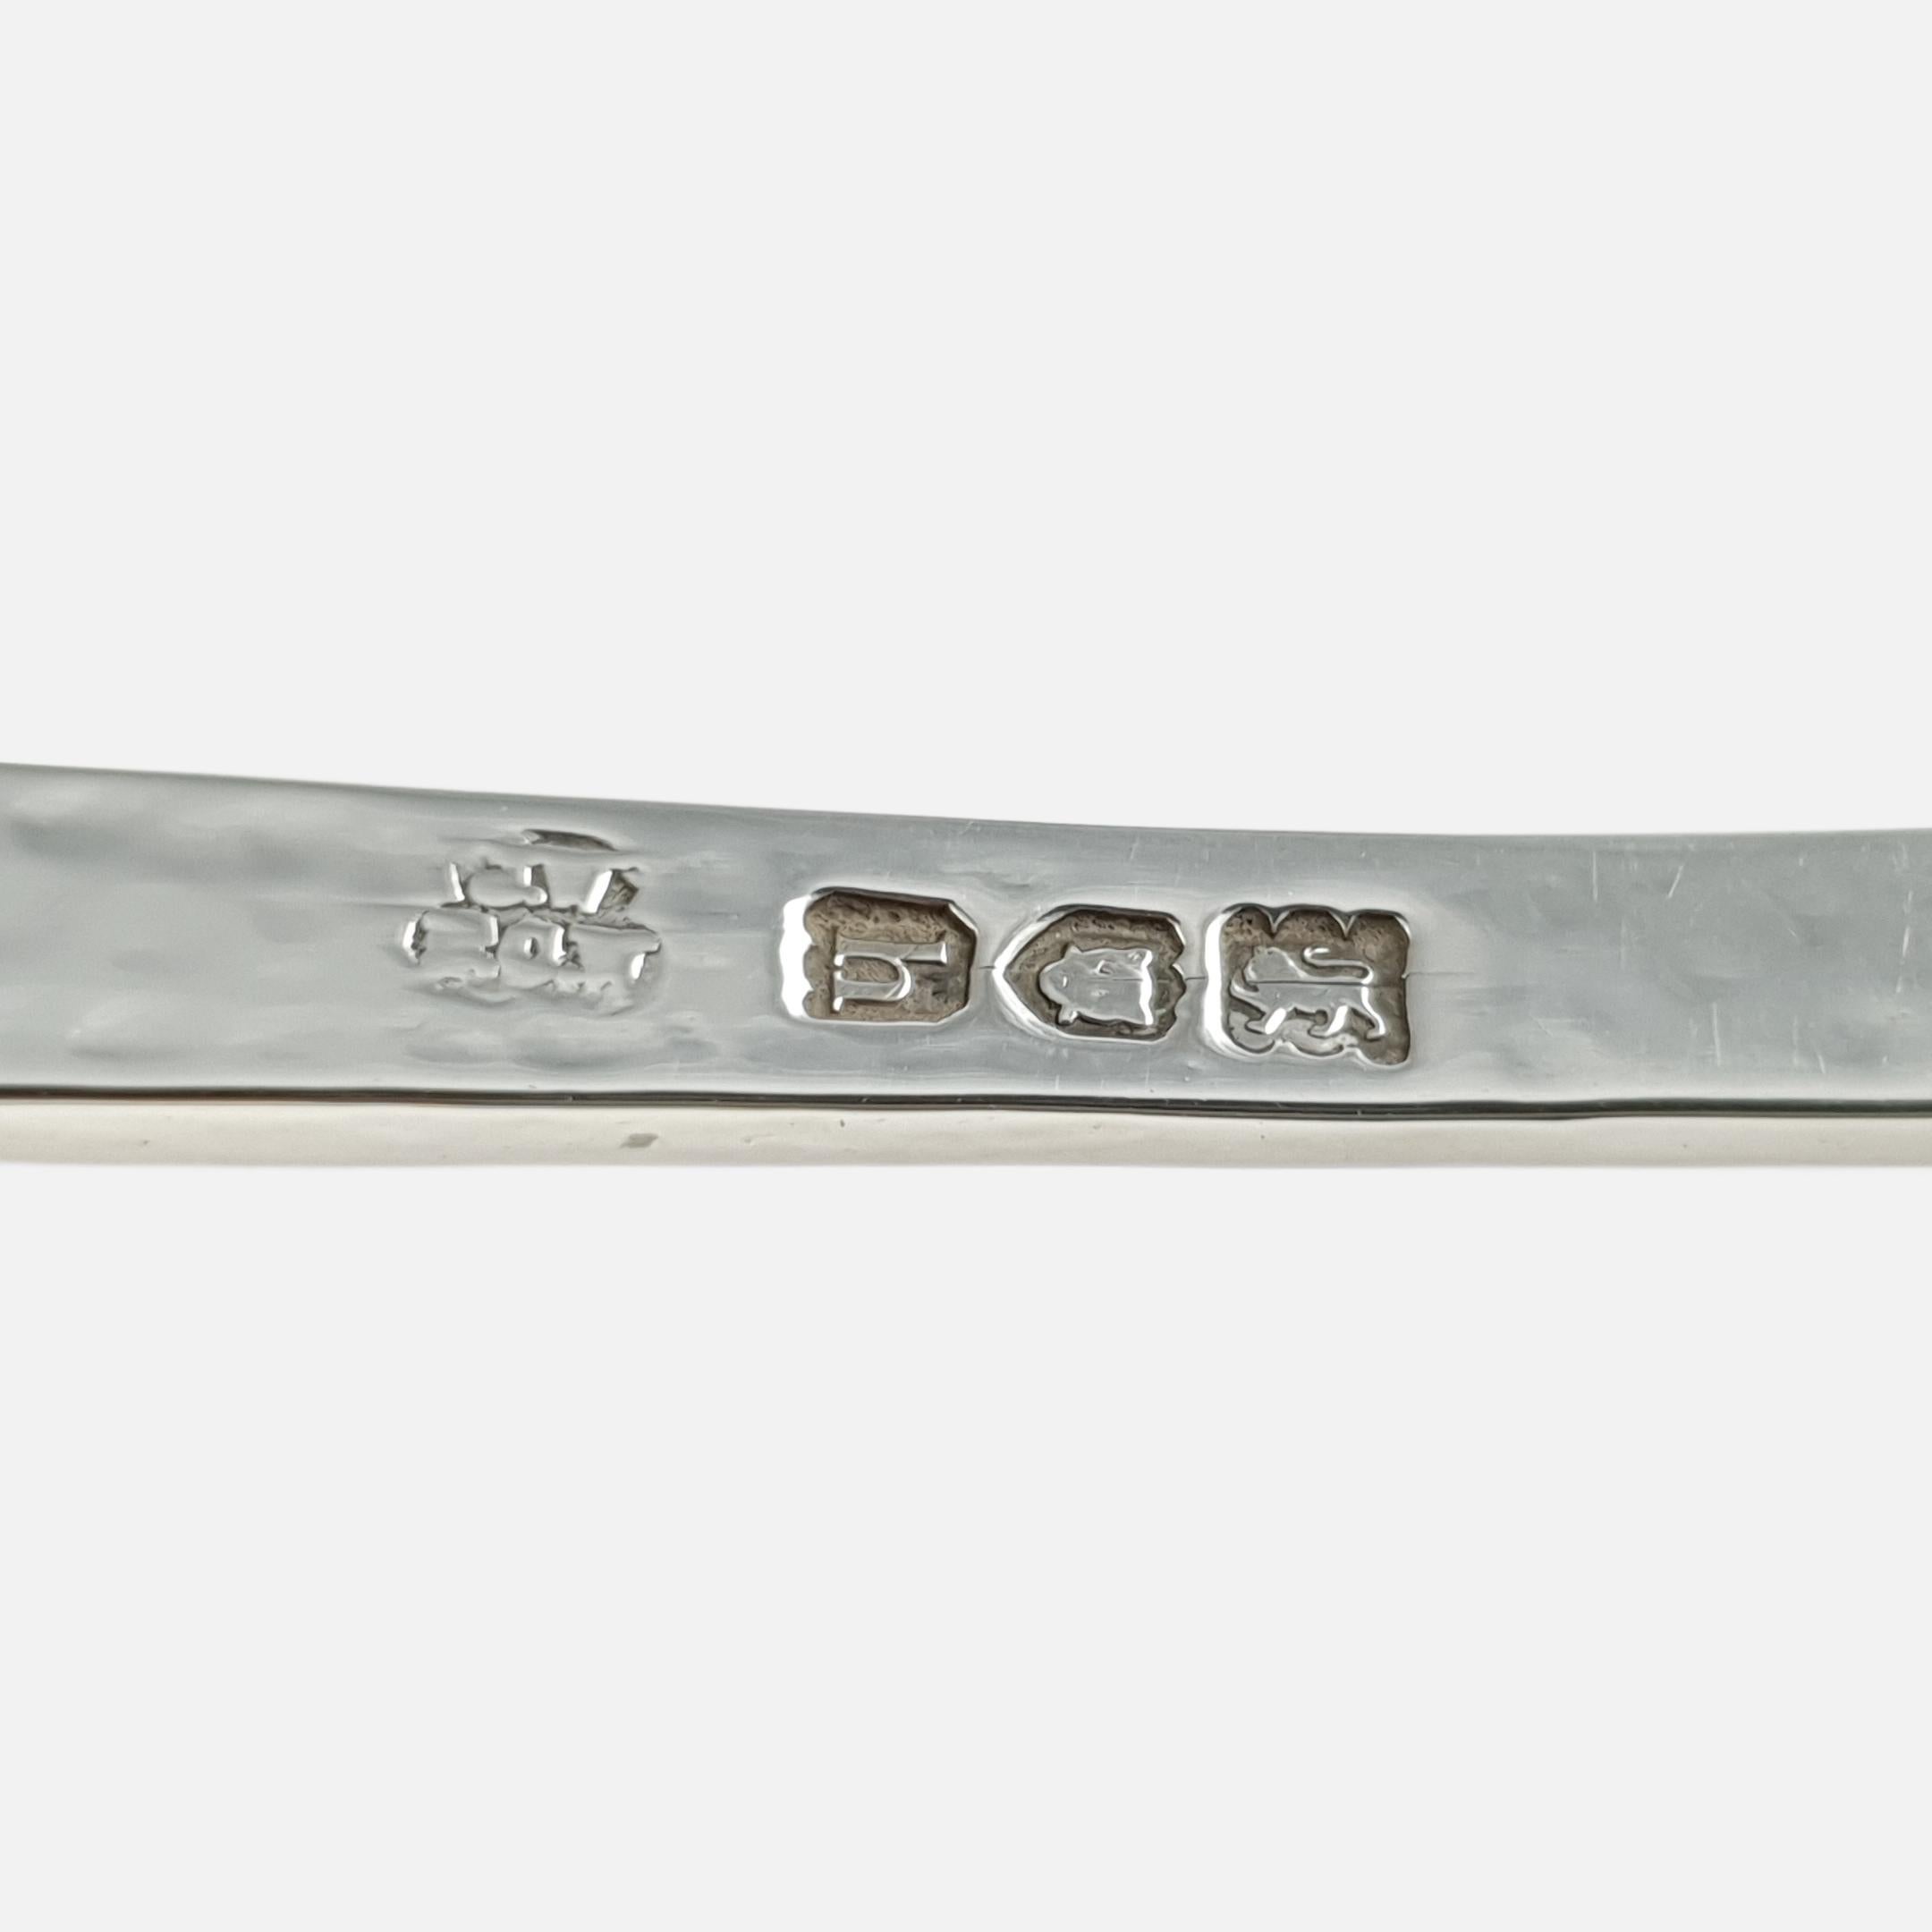 Early 20th Century Silver Spot Hammered Sugar Sifting Spoon, Wakely and Wheeler, 1903